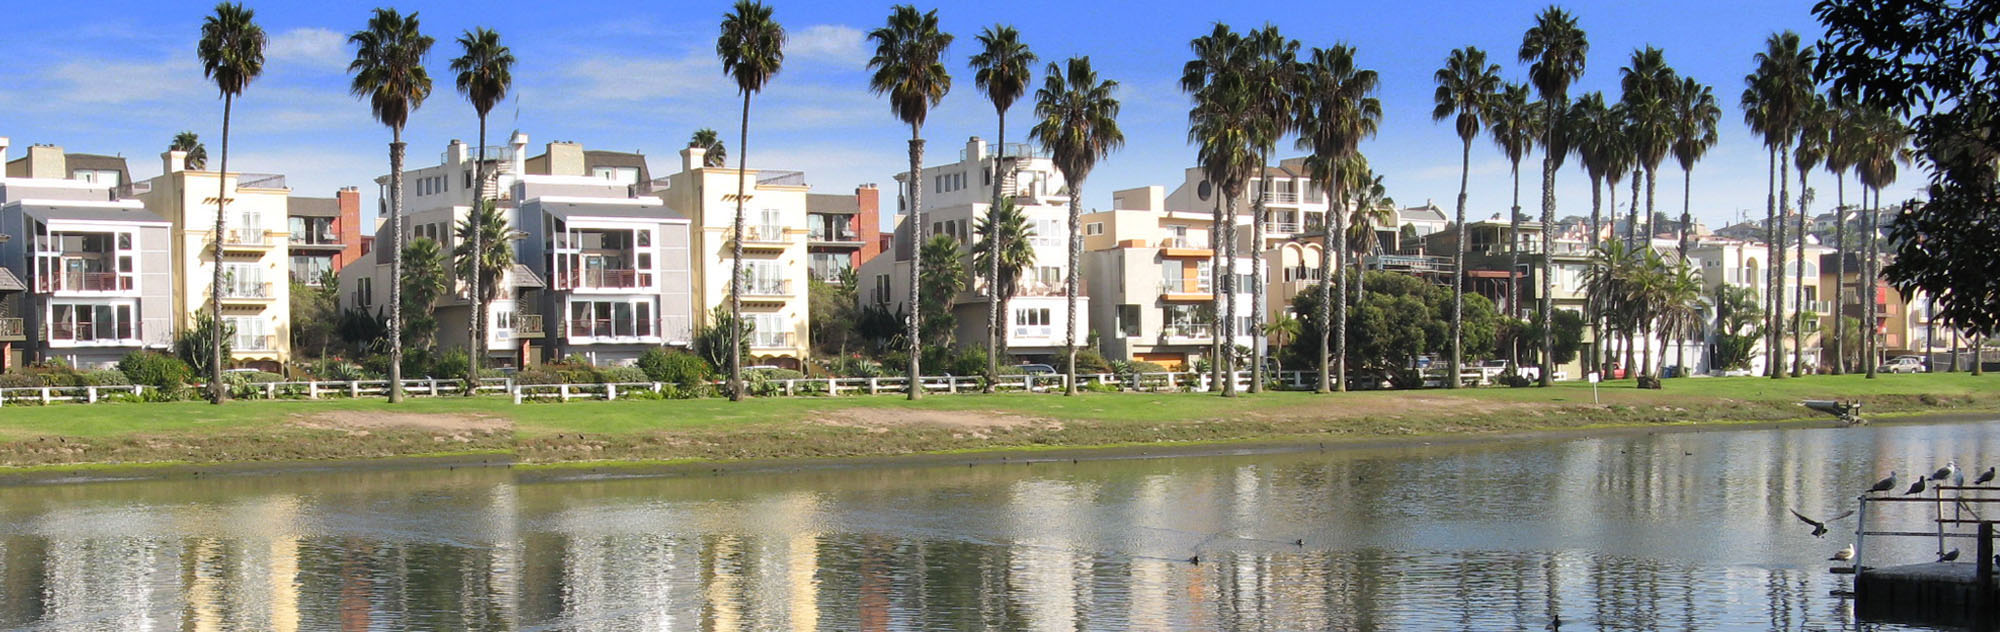 buildings with lagoon in front